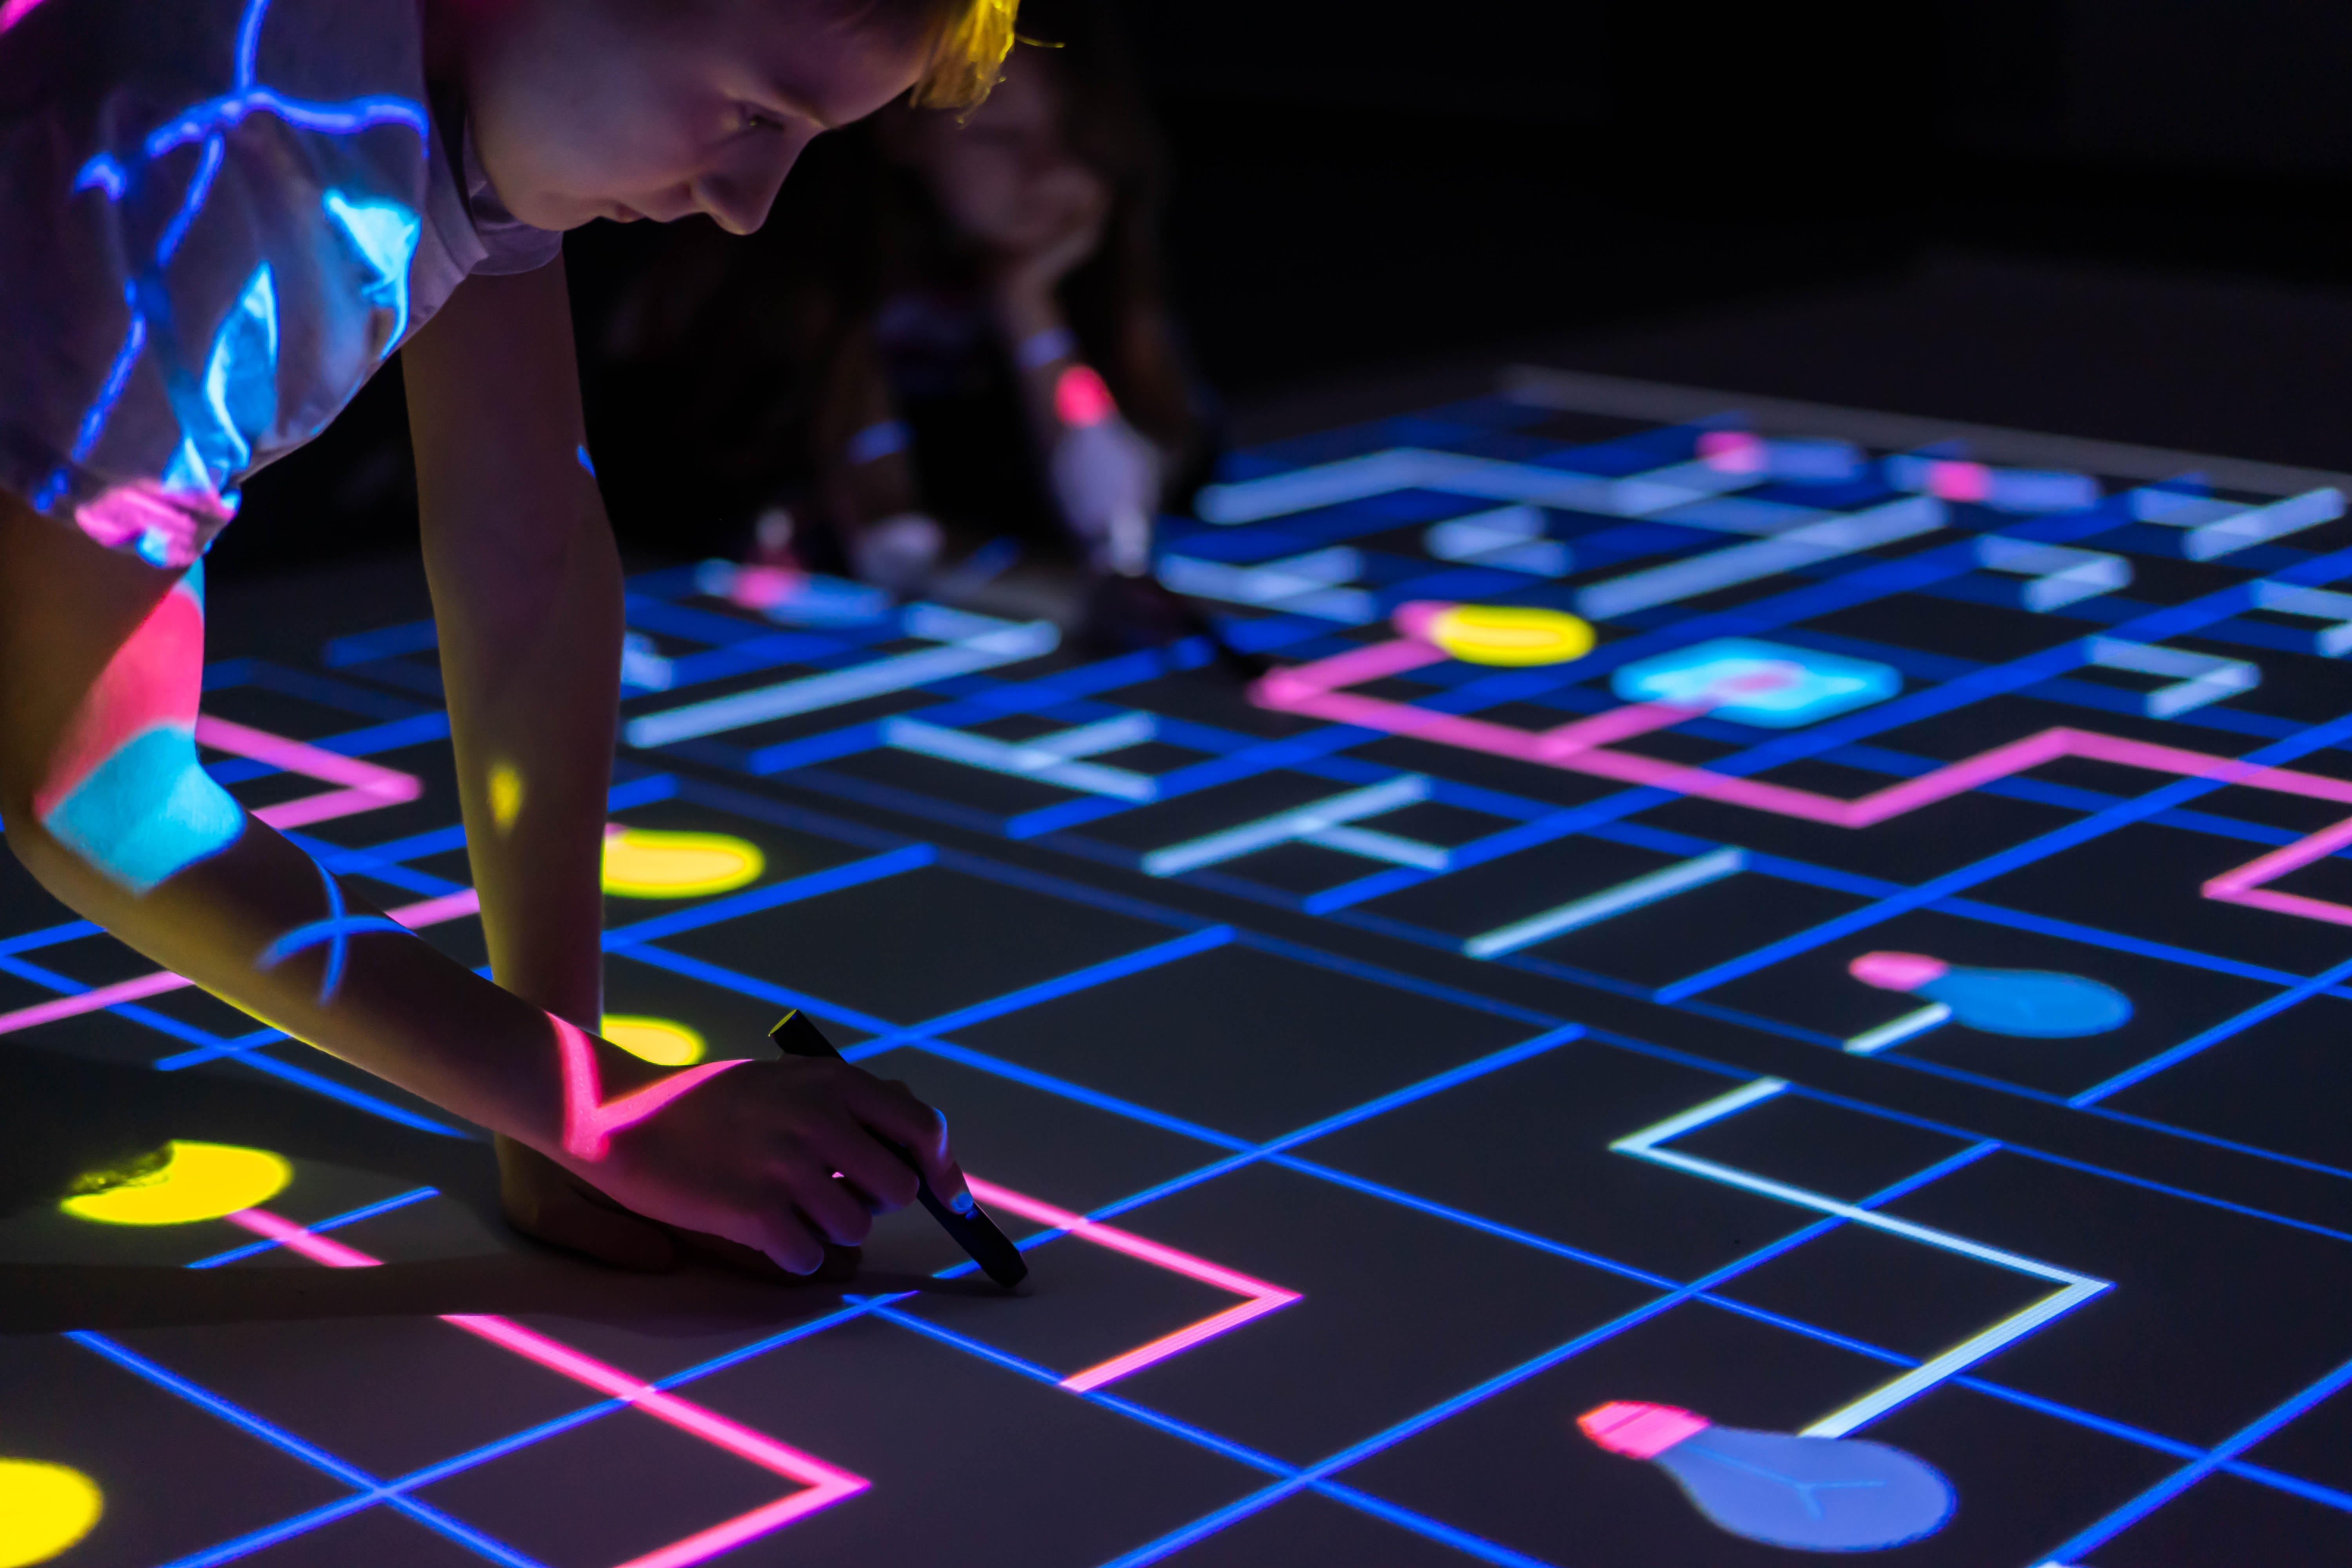 Light on! game on the interactive floor. Divided interactive workspace.